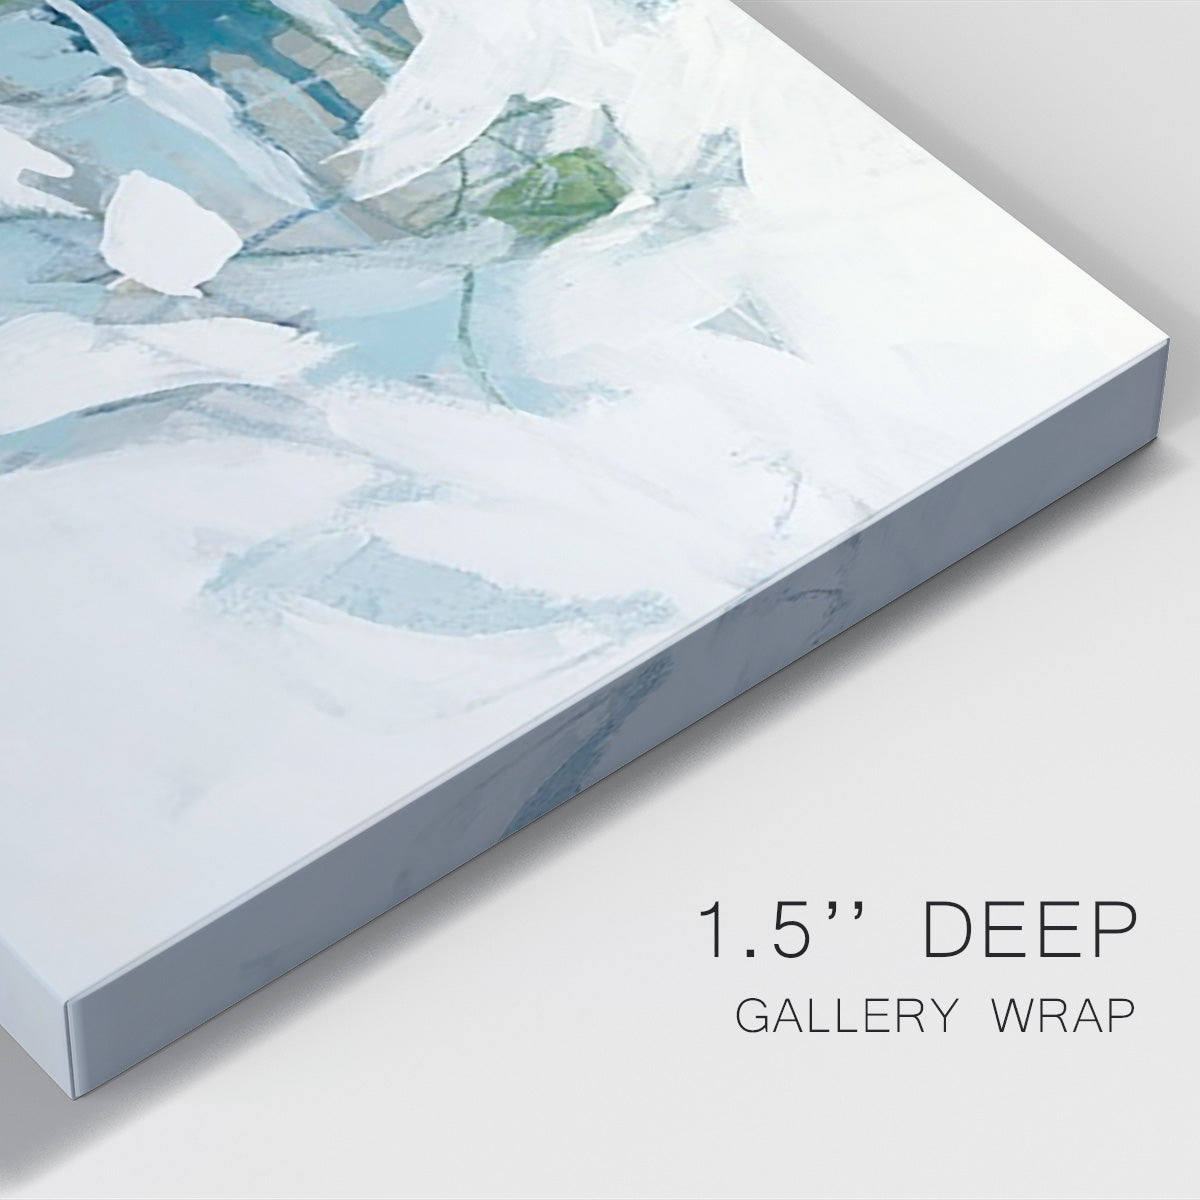 Ice Cavern III Premium Gallery Wrapped Canvas - Ready to Hang